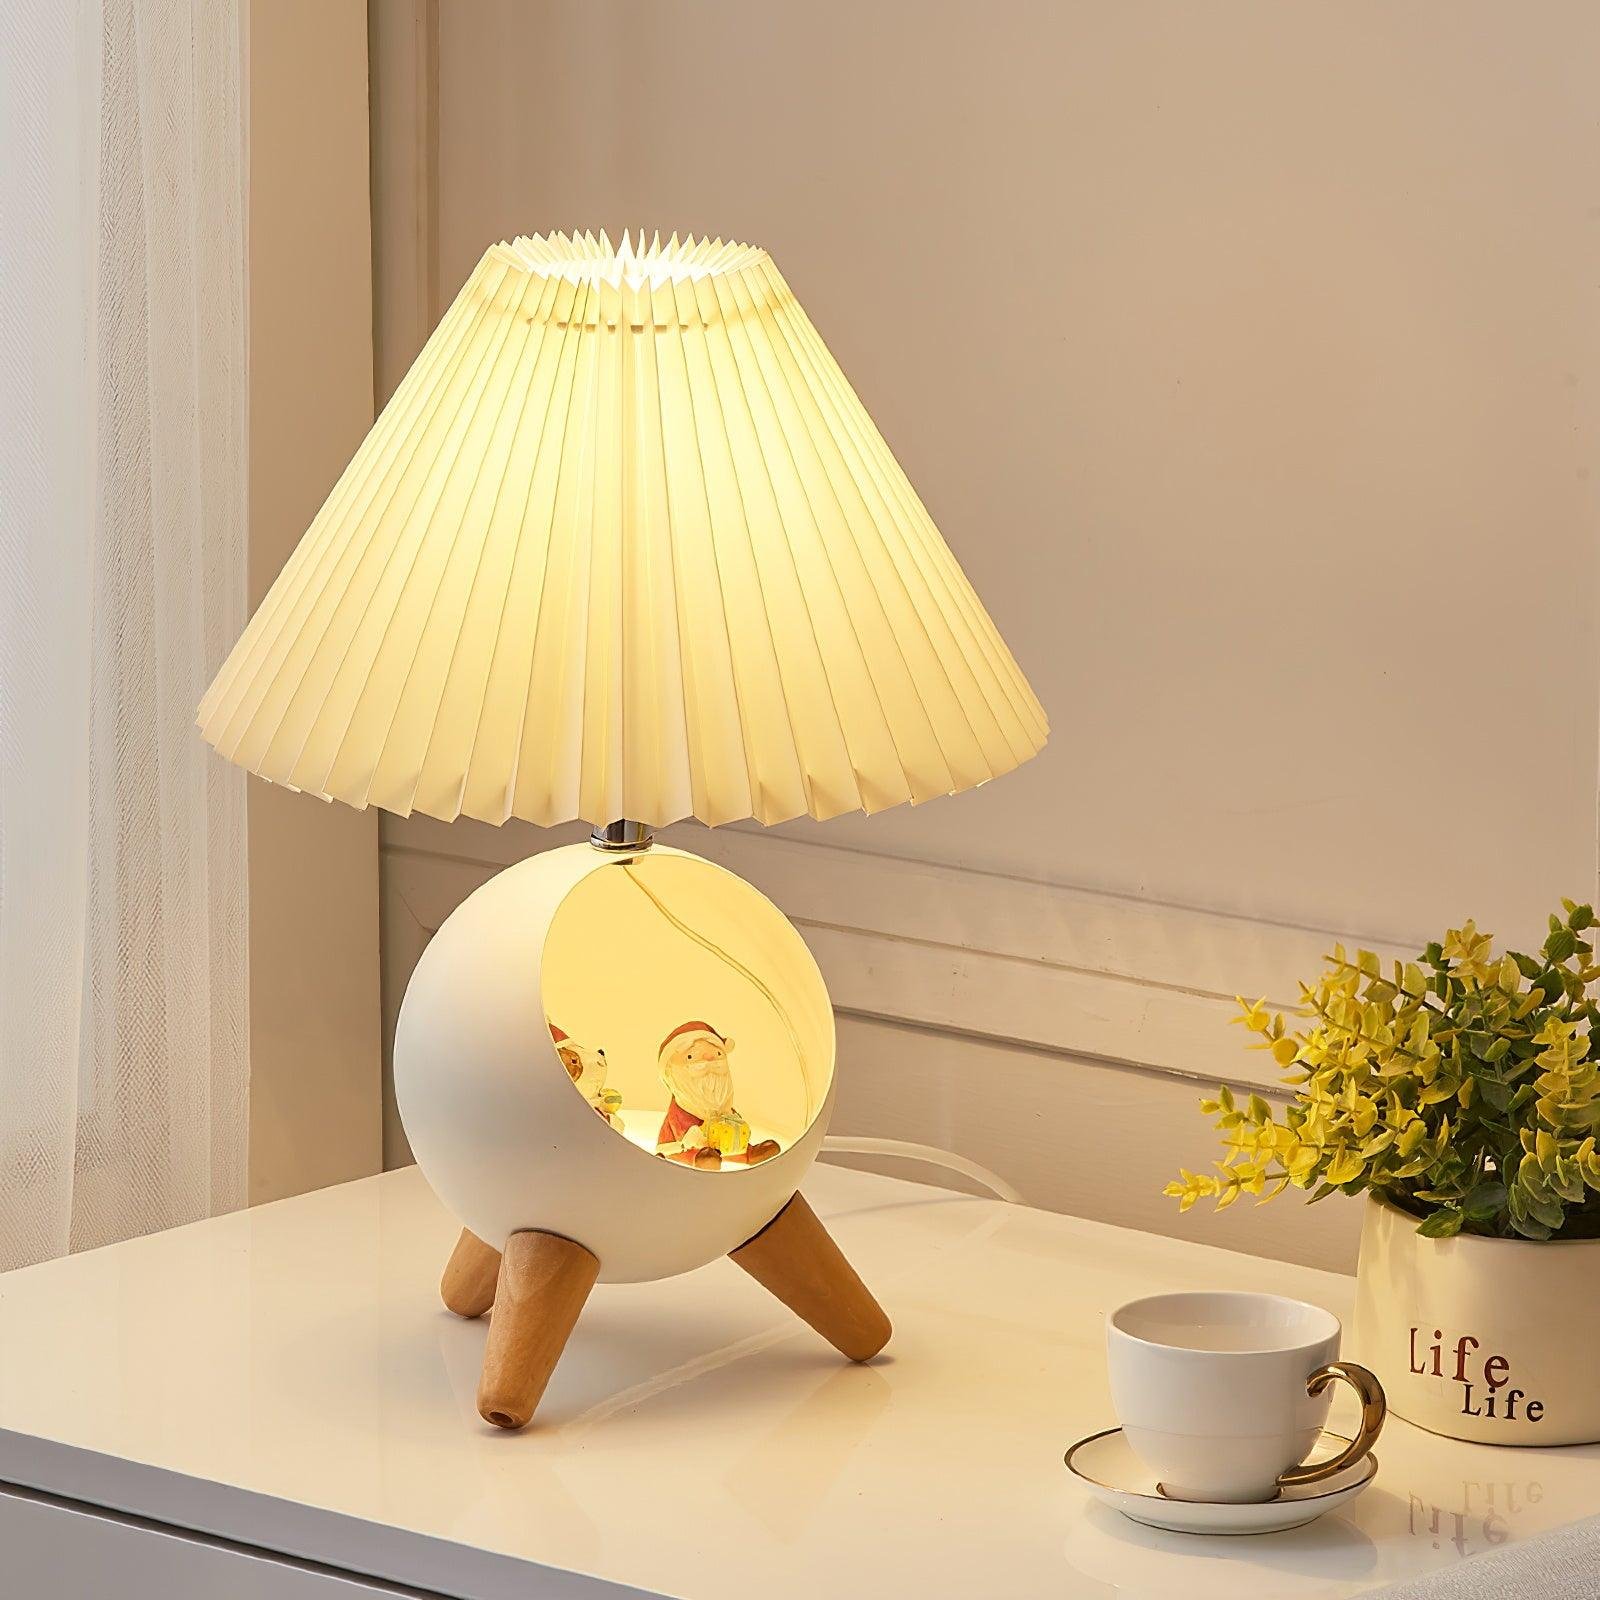 Wooden Small Table Lamp Diameter 10.2 inches x Height 15.4 inches, Diameter 26cm x Height 39cm, Color: White, Comes with UK Plug.